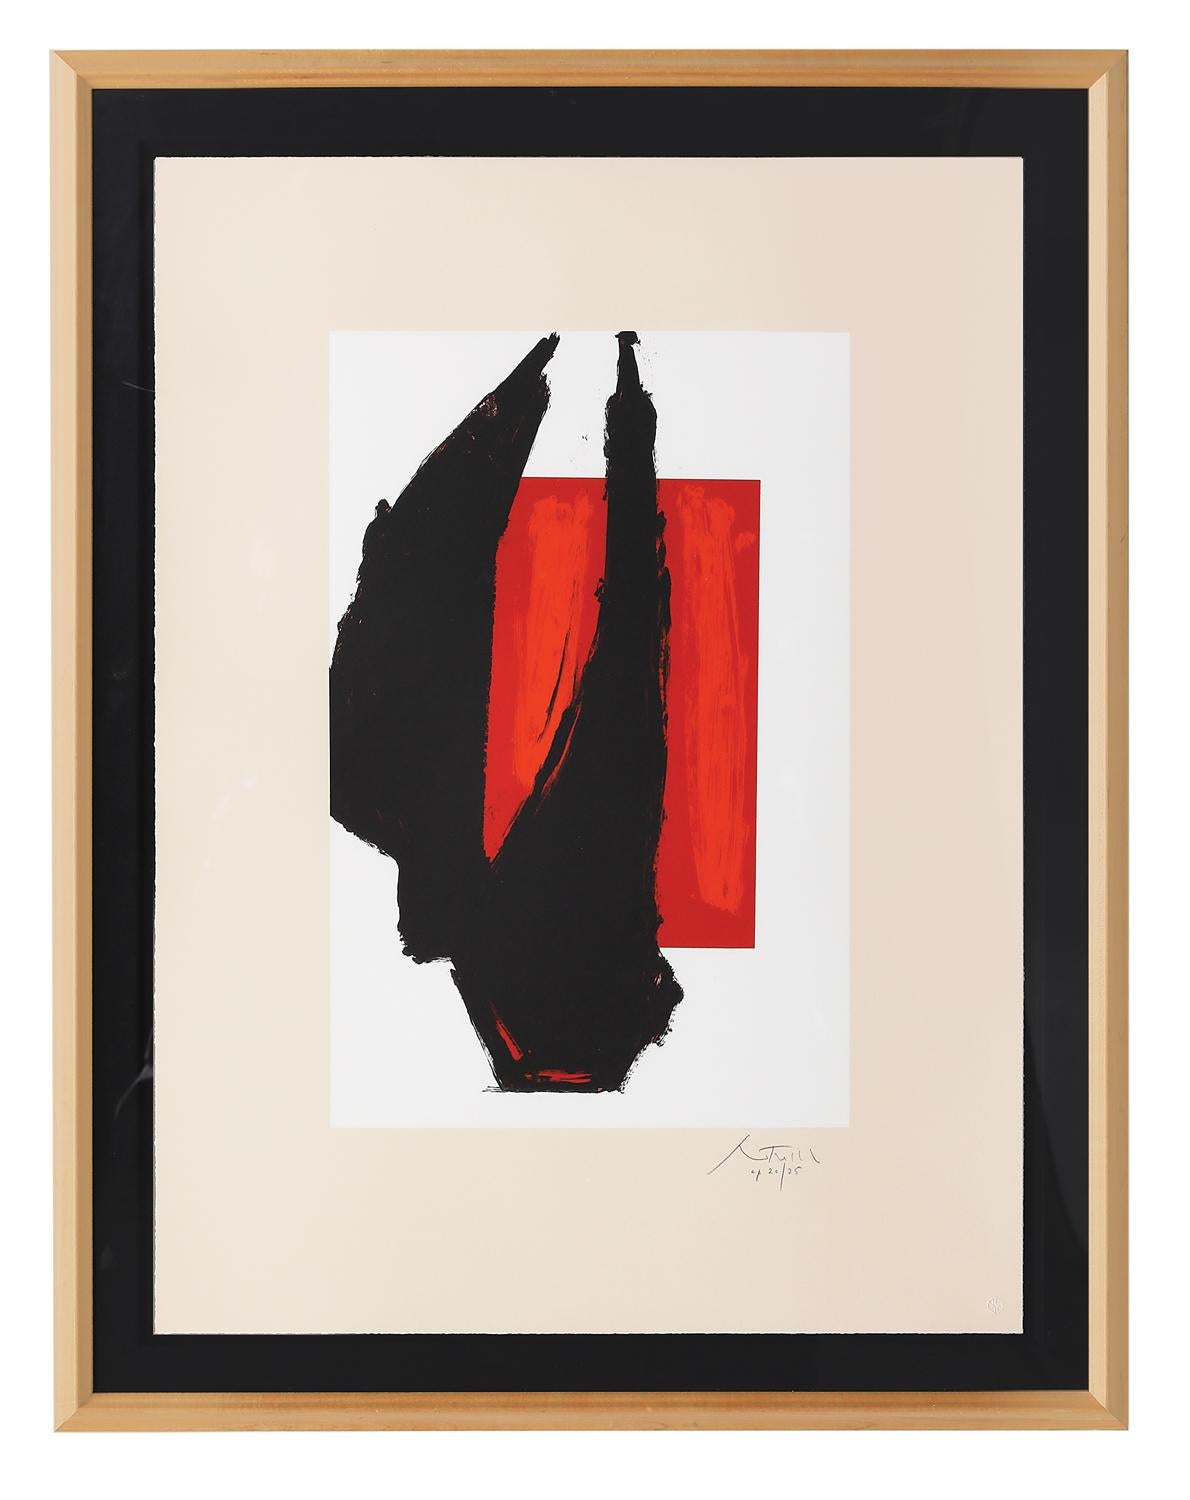 Superb Robert Motherwell Lithograph (Signed and Numbered)